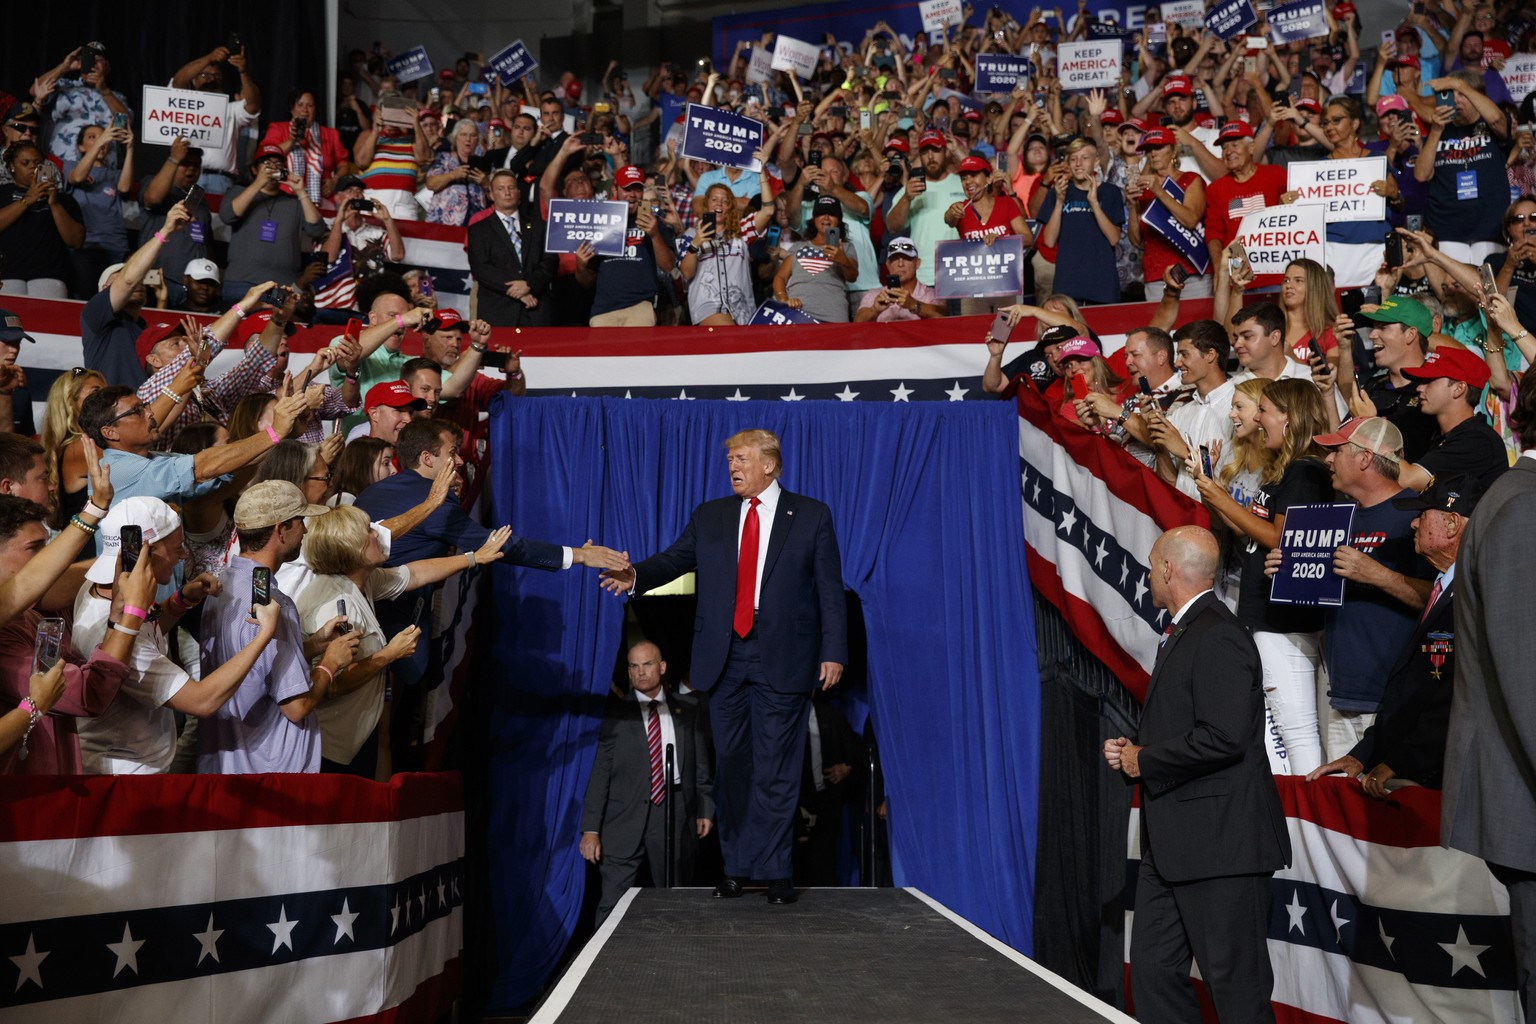 President Donald Trump arrives to speak at a campaign rally at Williams Arena in Greenville, N.C., Wednesday, July 17, 2019. (AP Photo/Carolyn Kaster)
Donald Trump